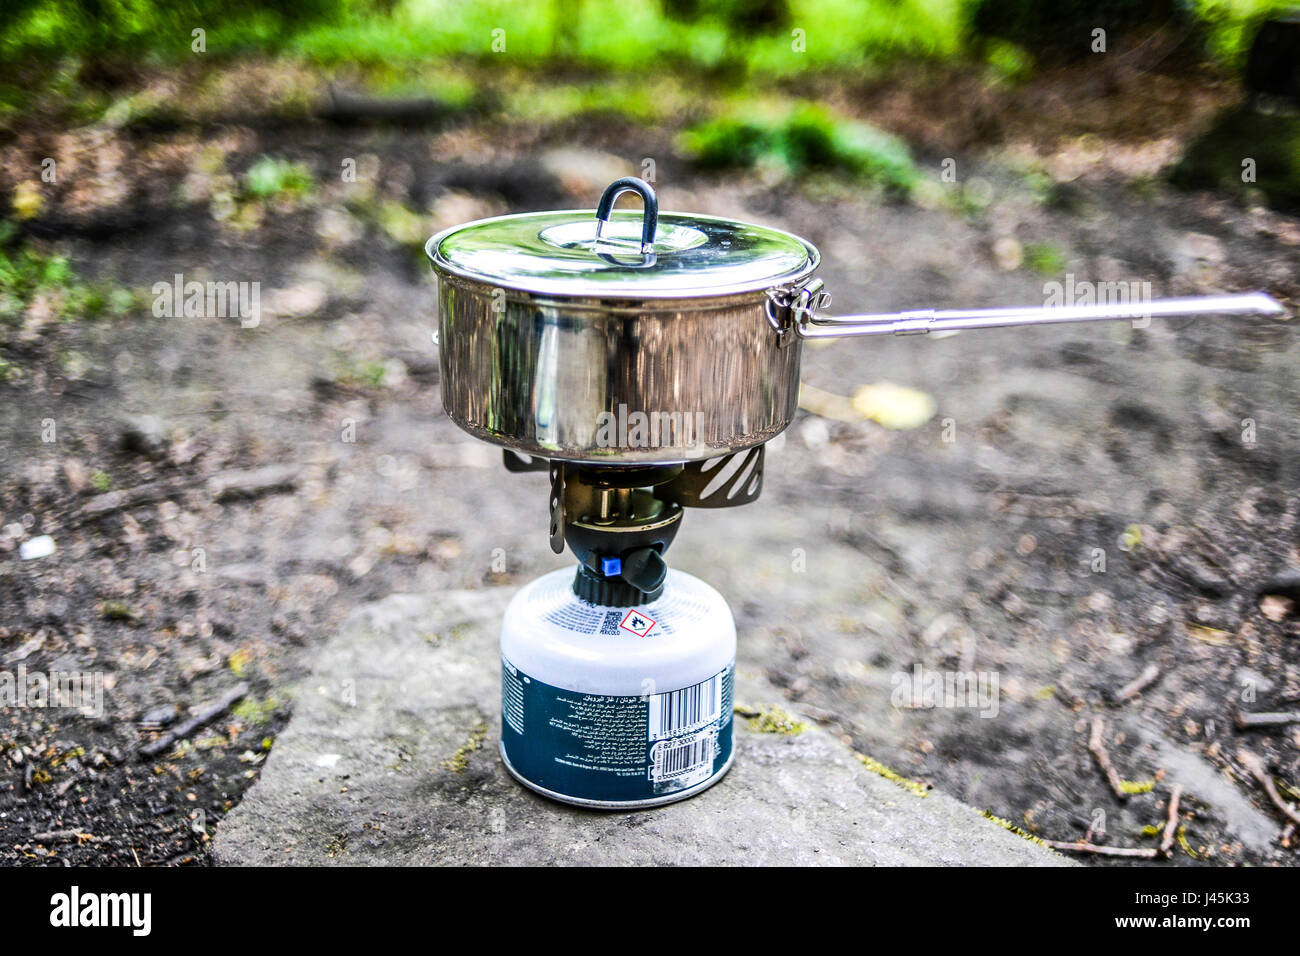 Outdoor cooking on a gas stove, survival. Stock Photo